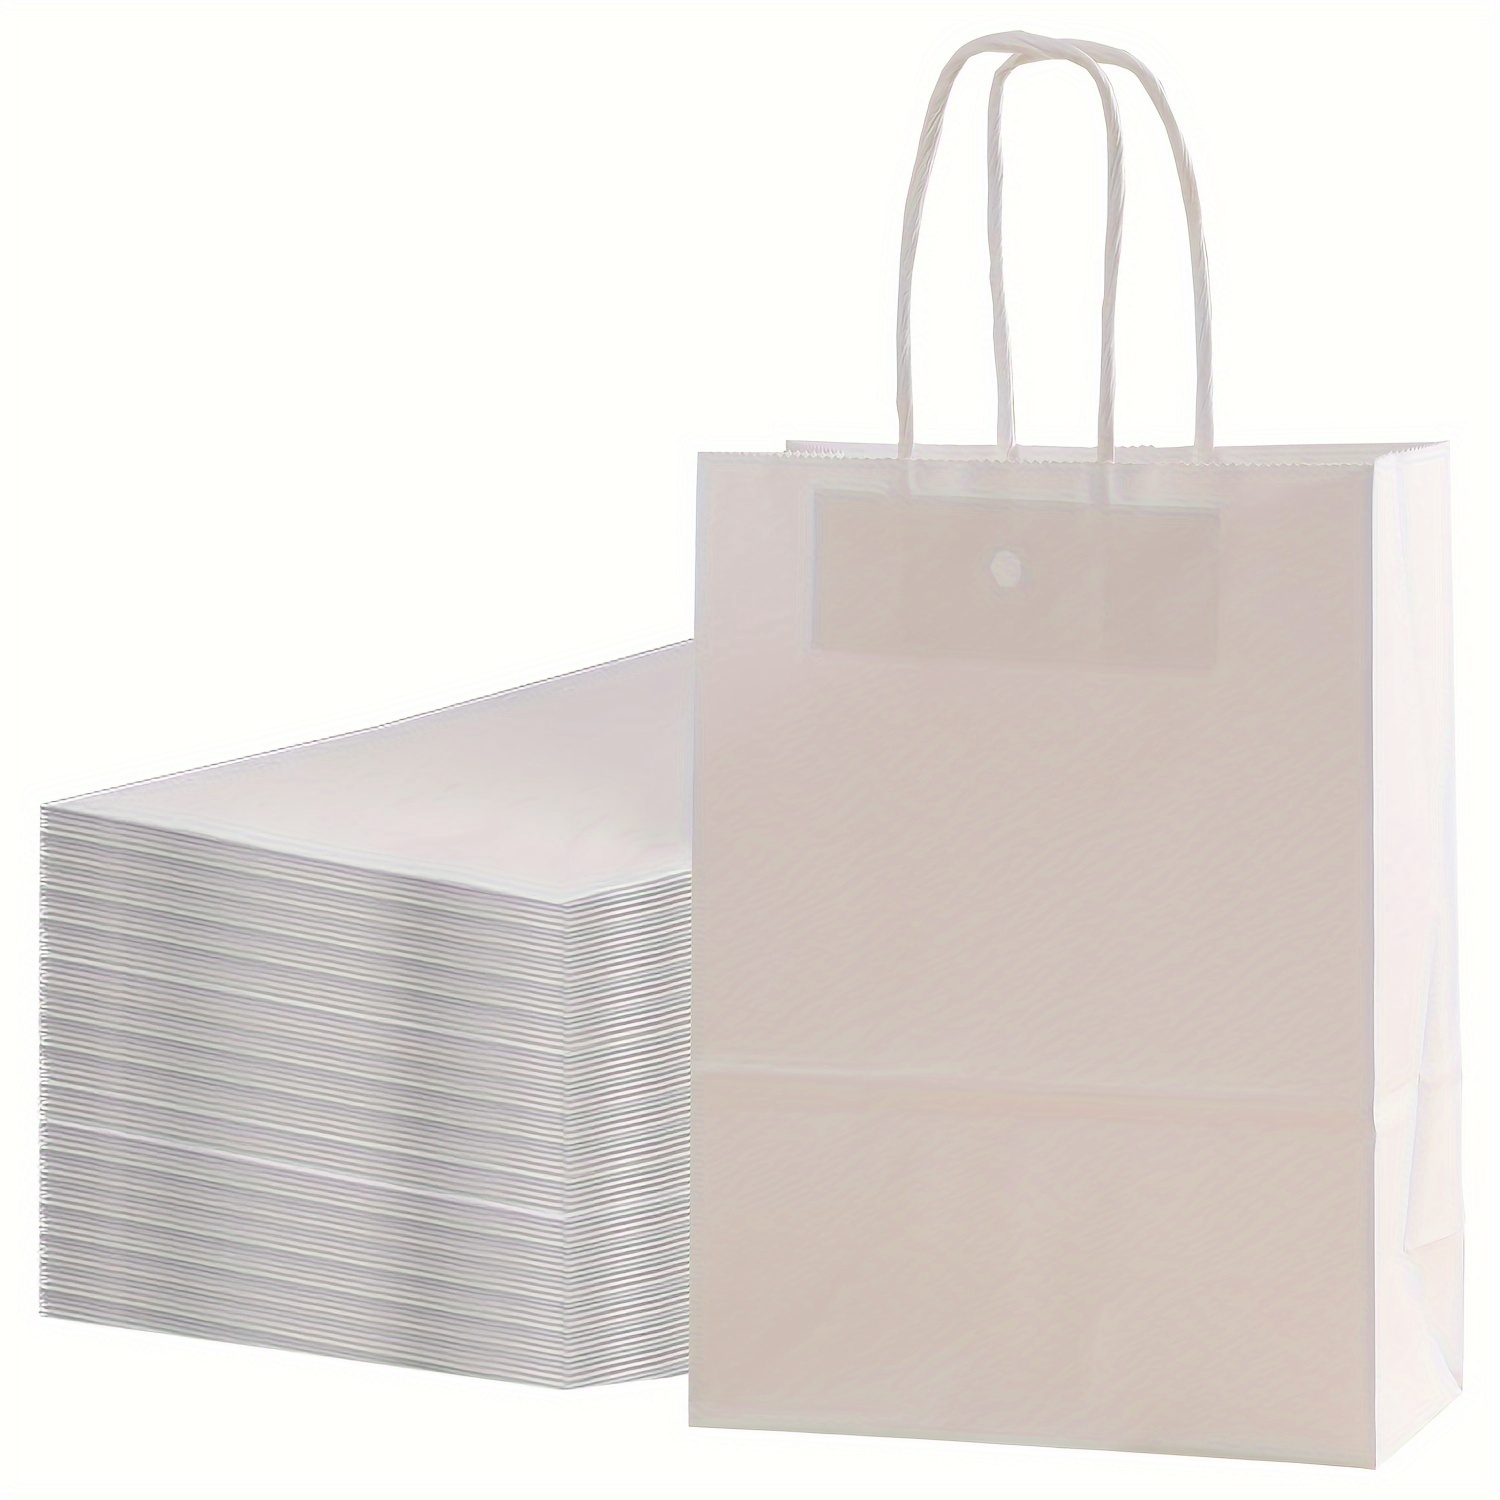 

24-piece White Gift Bags 6.3x8.7x3.1" - Versatile For Birthdays, Weddings & More | Reusable Shopping & Takeout Bags With Handles